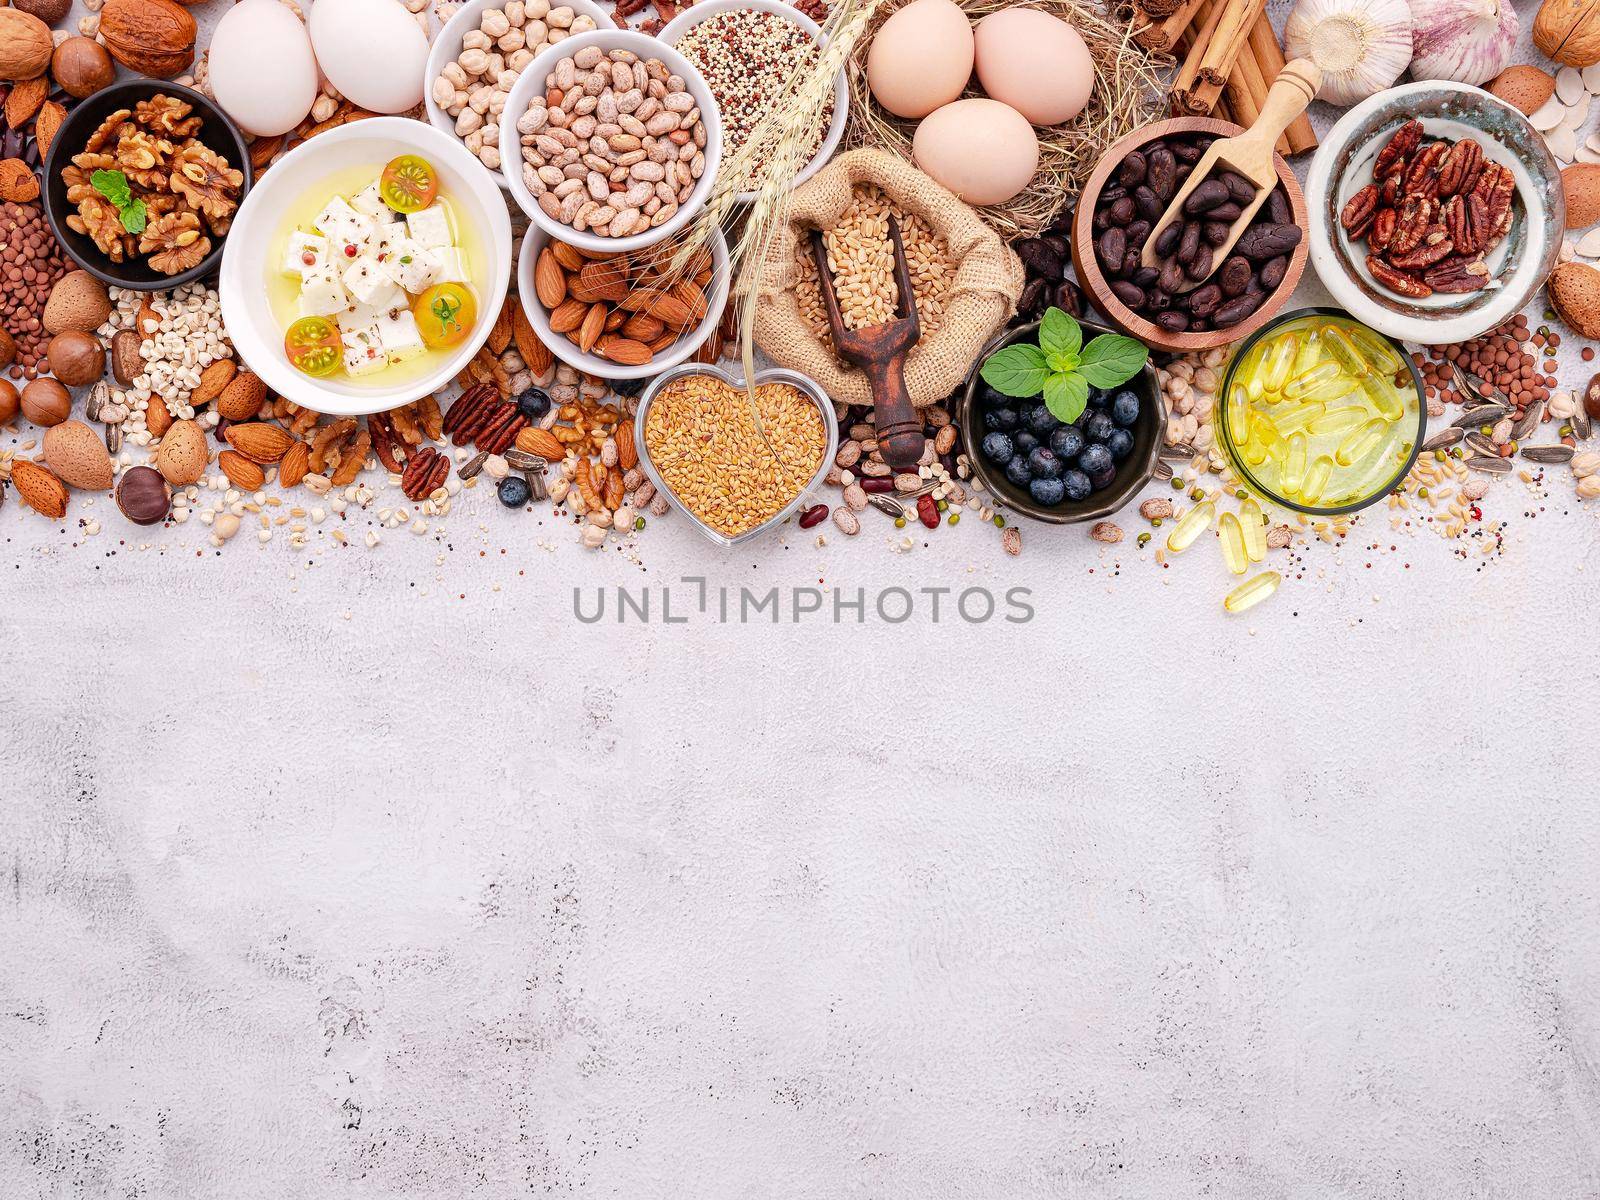 Ingredients for the healthy foods selection. The concept of superfoods set up on white shabby concrete background with copy space. by kerdkanno